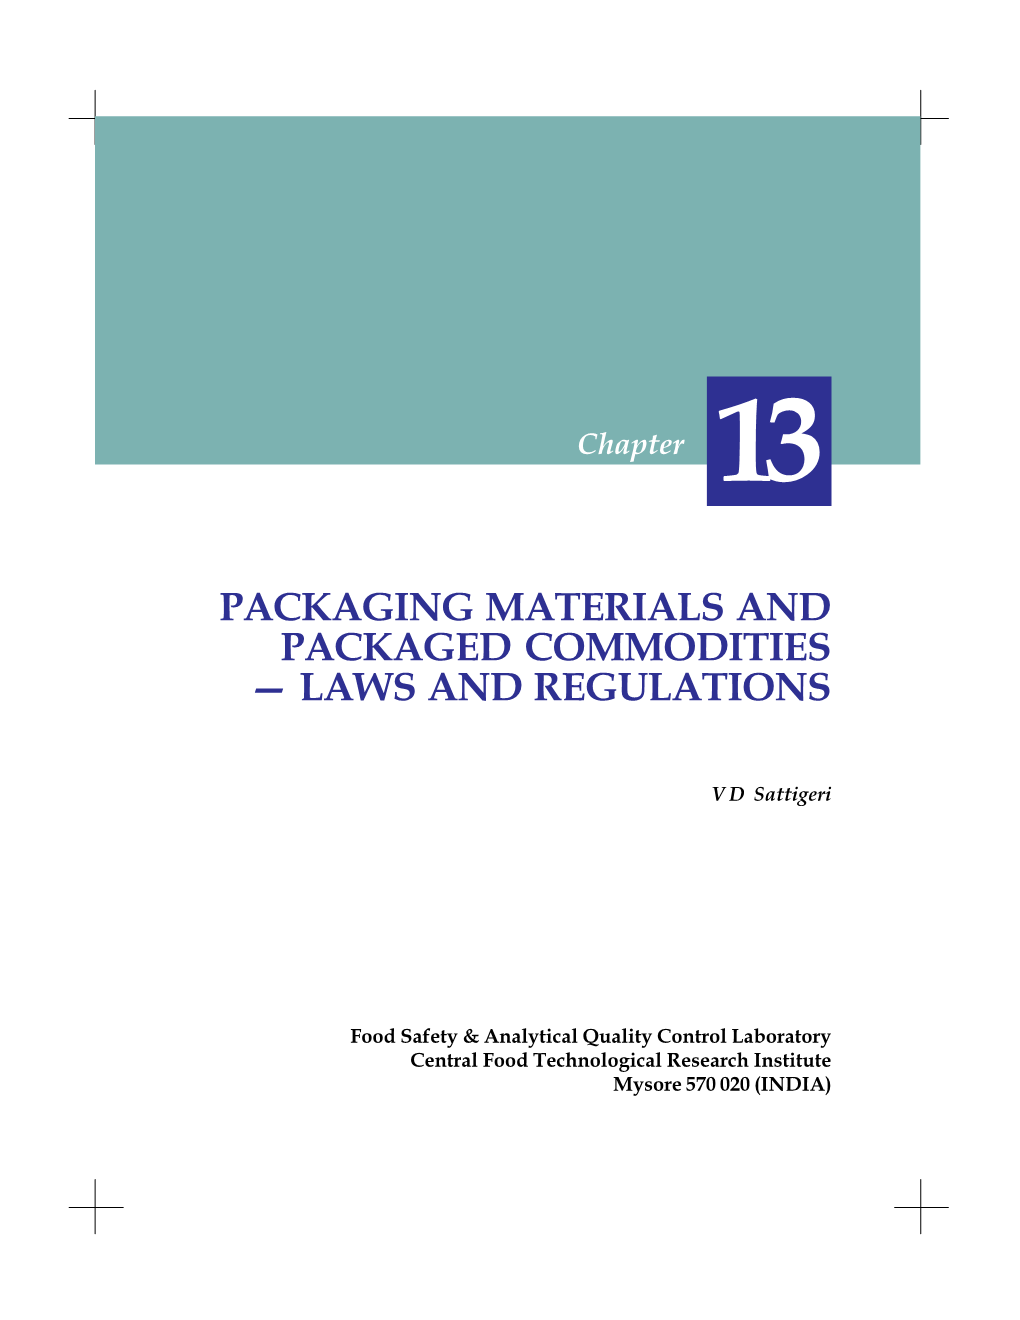 Packaging Materials and Packaged Commodities — Laws and Regulations 223